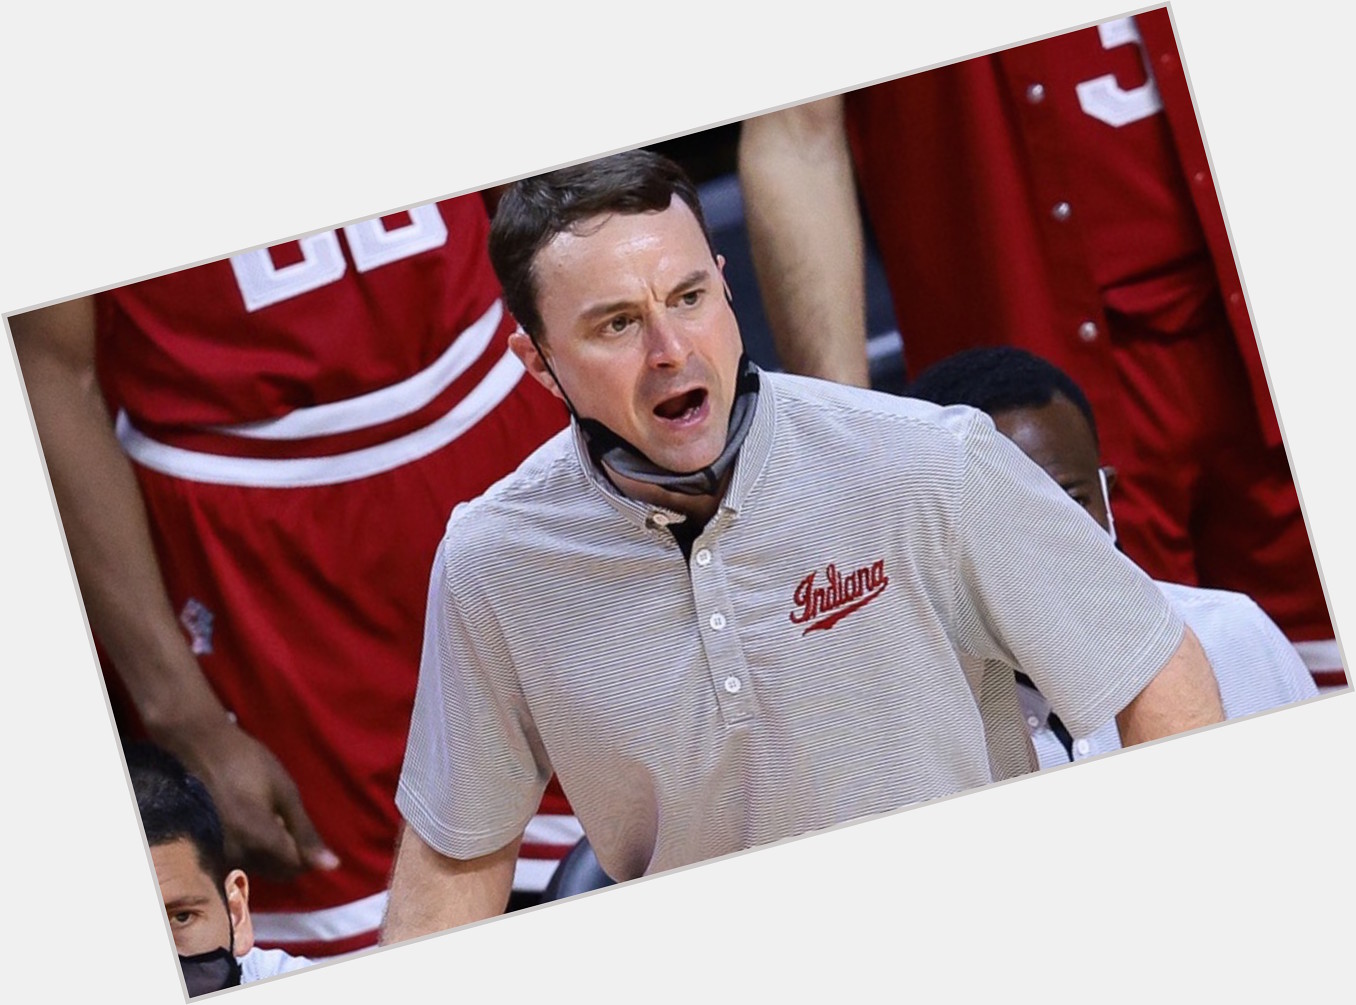 Http://fanpagepress.net/m/A/Archie Miller New Pic 1